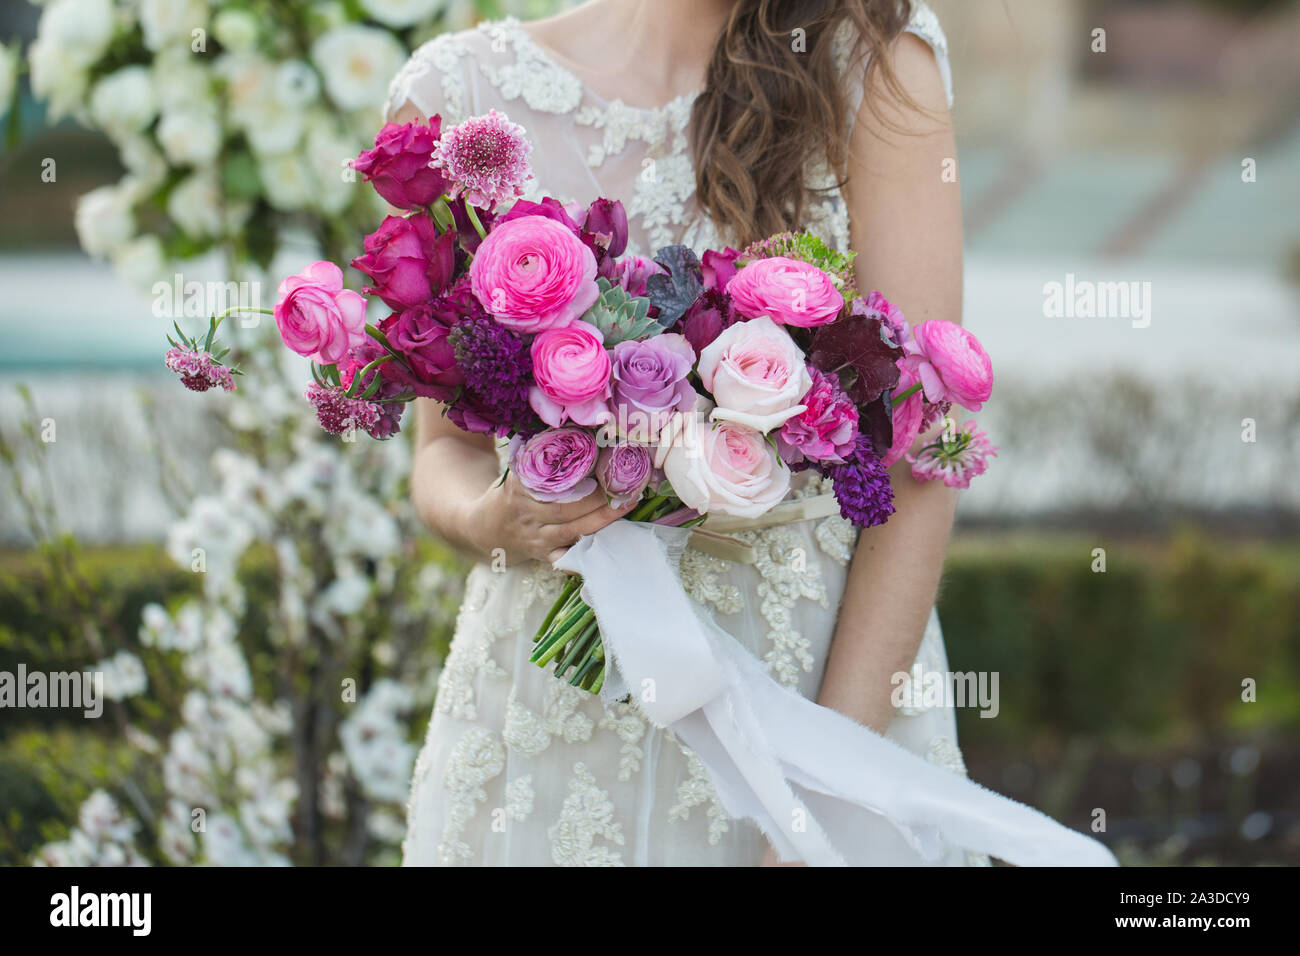 Bride with beautiful wedding bouquet. Pink rose and other flowers. Stock Photo